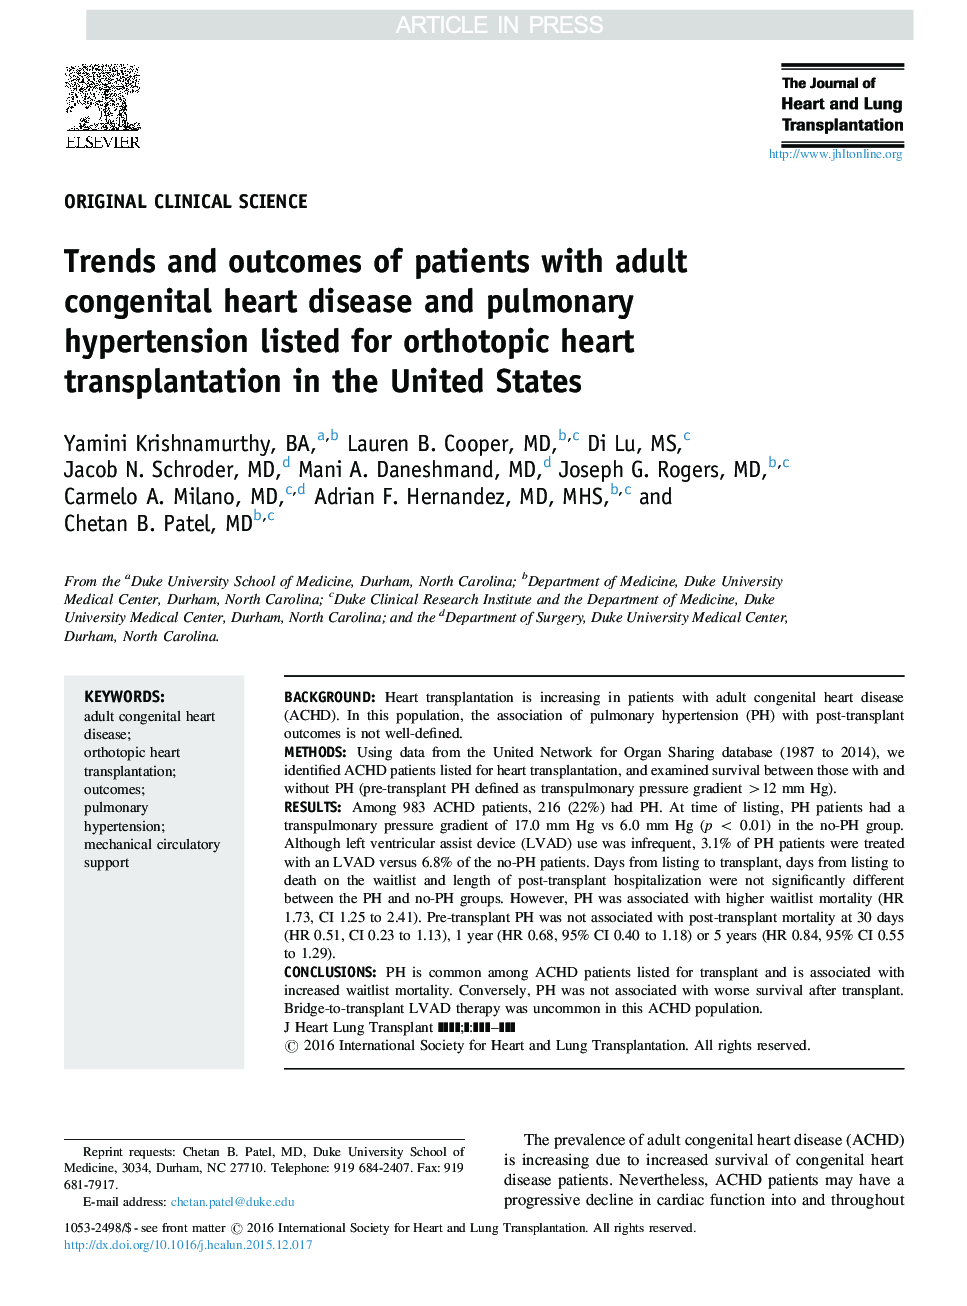 Trends and outcomes of patients with adult congenital heart disease and pulmonary hypertension listed for orthotopic heart transplantation in the United States